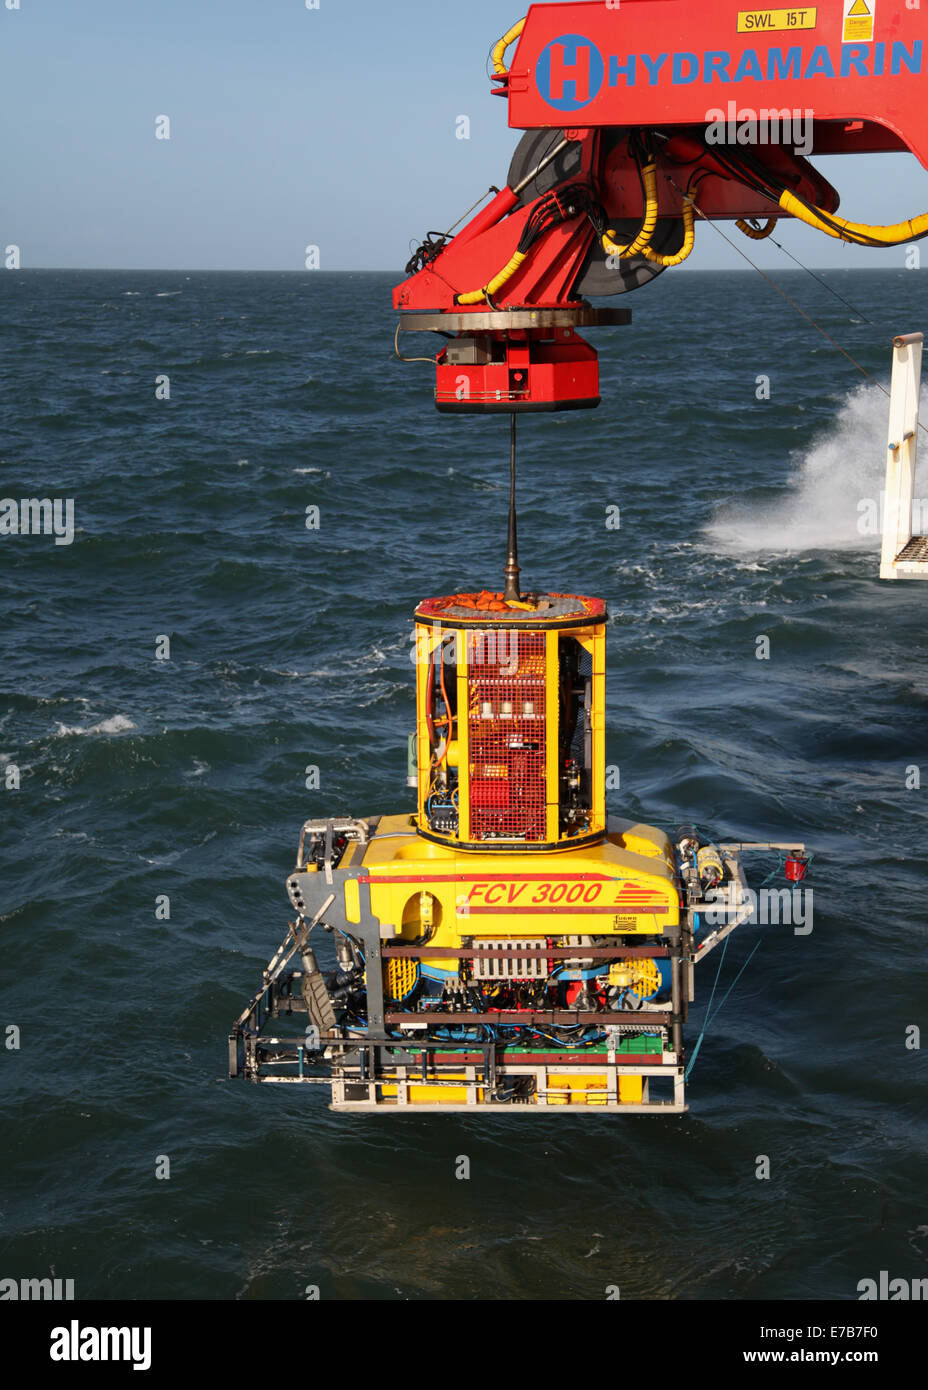 A Remotely Operated Vehicle (ROV) working offshore on the Gwynt y Mor Offshore Wind Farm Stock Photo